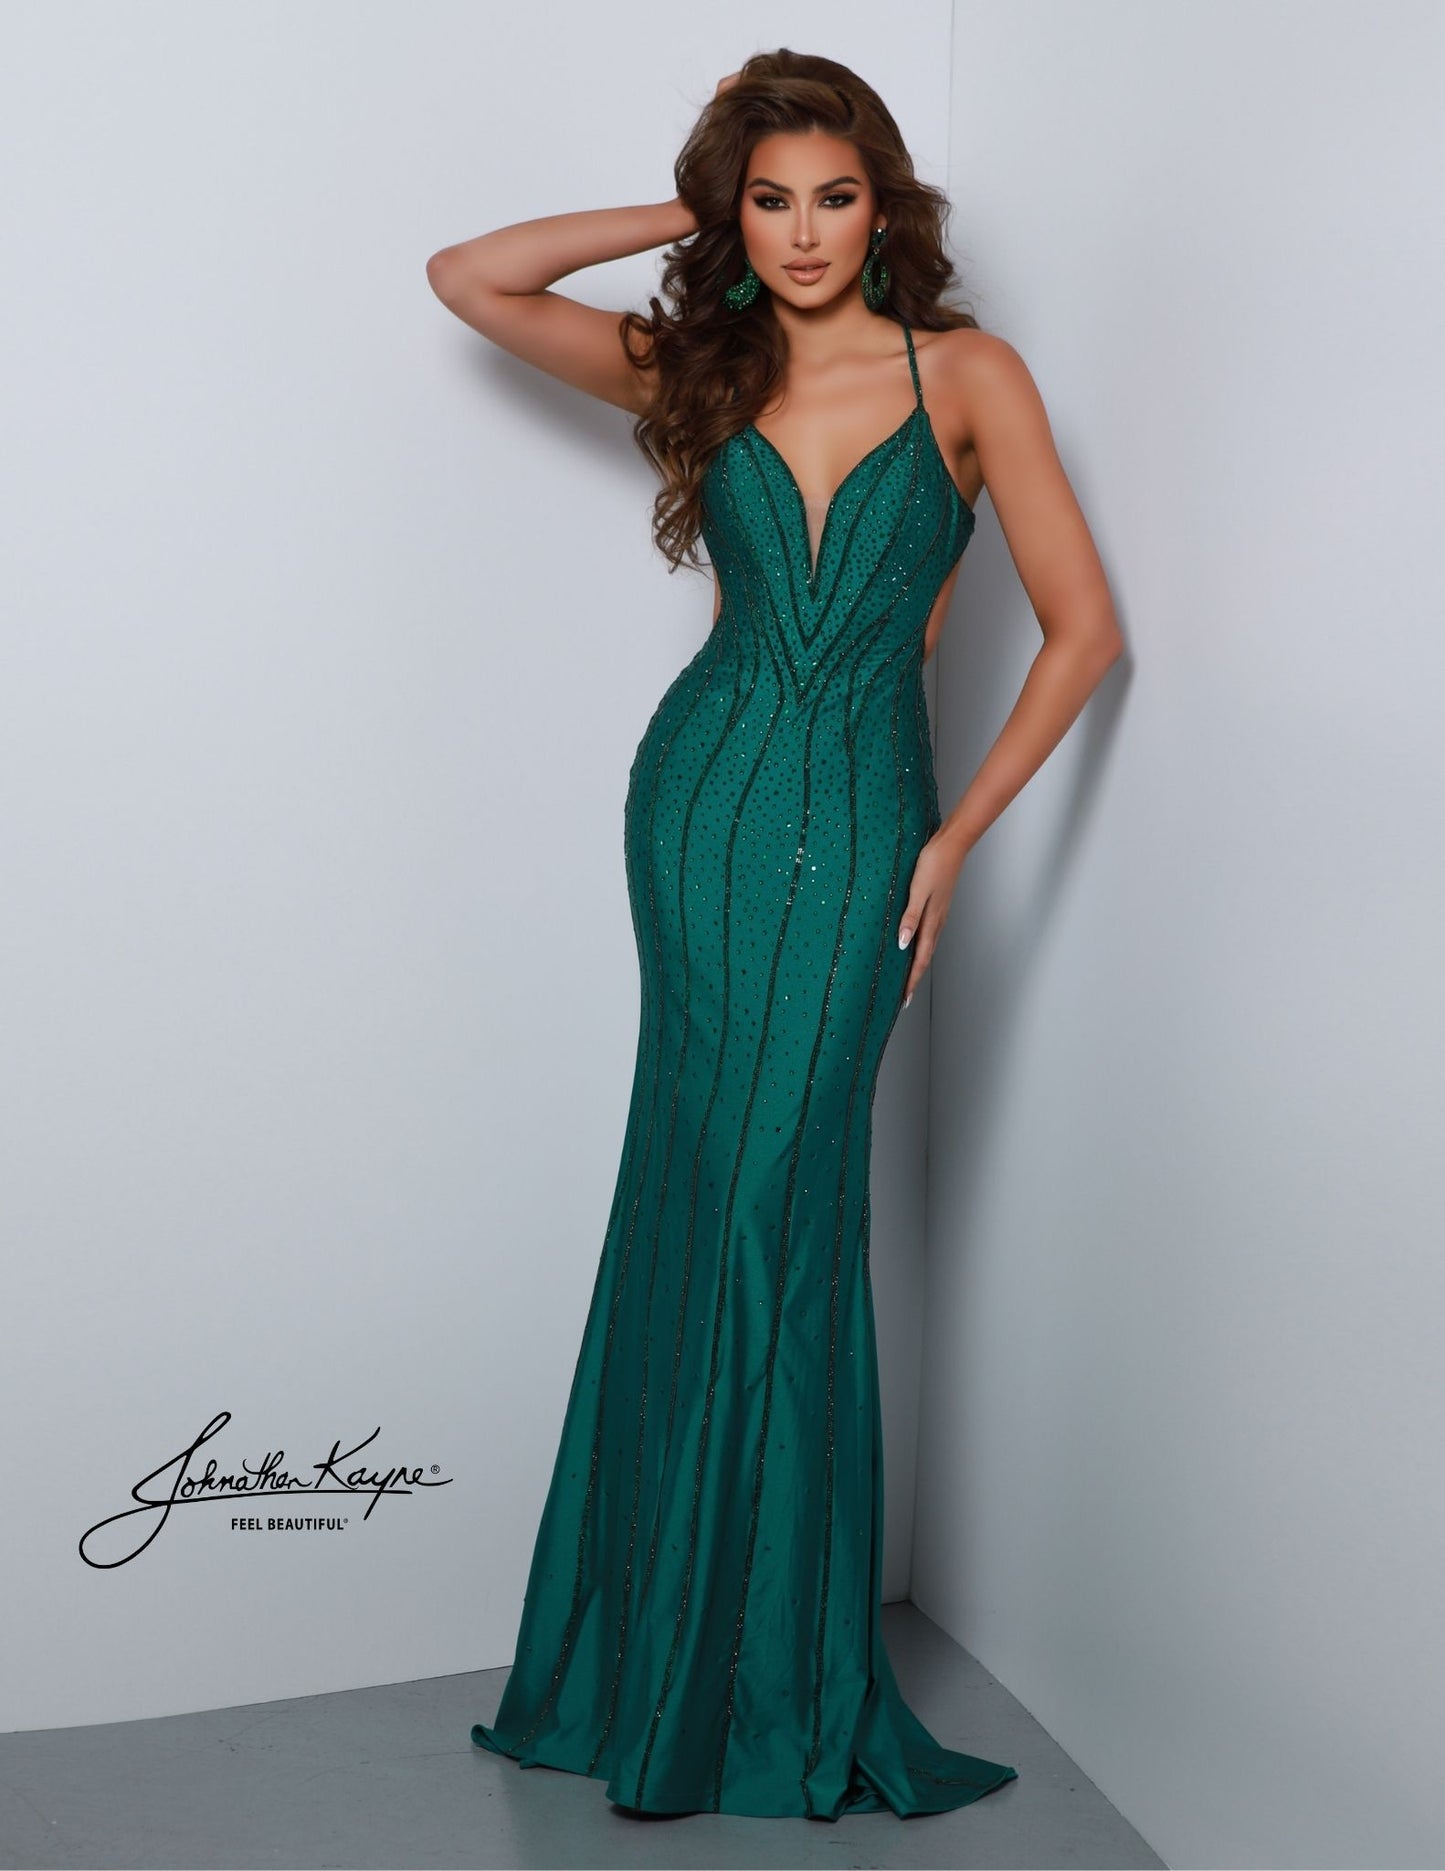 The Johnathan Kayne 2868 mermaid gown features a fitted plunging v-neckline and crystal accents for a stunning look. Perfect for formal occasions such as proms, pageants, or special events, the dress is sure to make an impact. The back takes center stage in this 4 Way Stretch Lycra gown. This gown features rows of crystal trim and a low back that is sure to steal the show and making sure you leave a lasting impression from every angle.